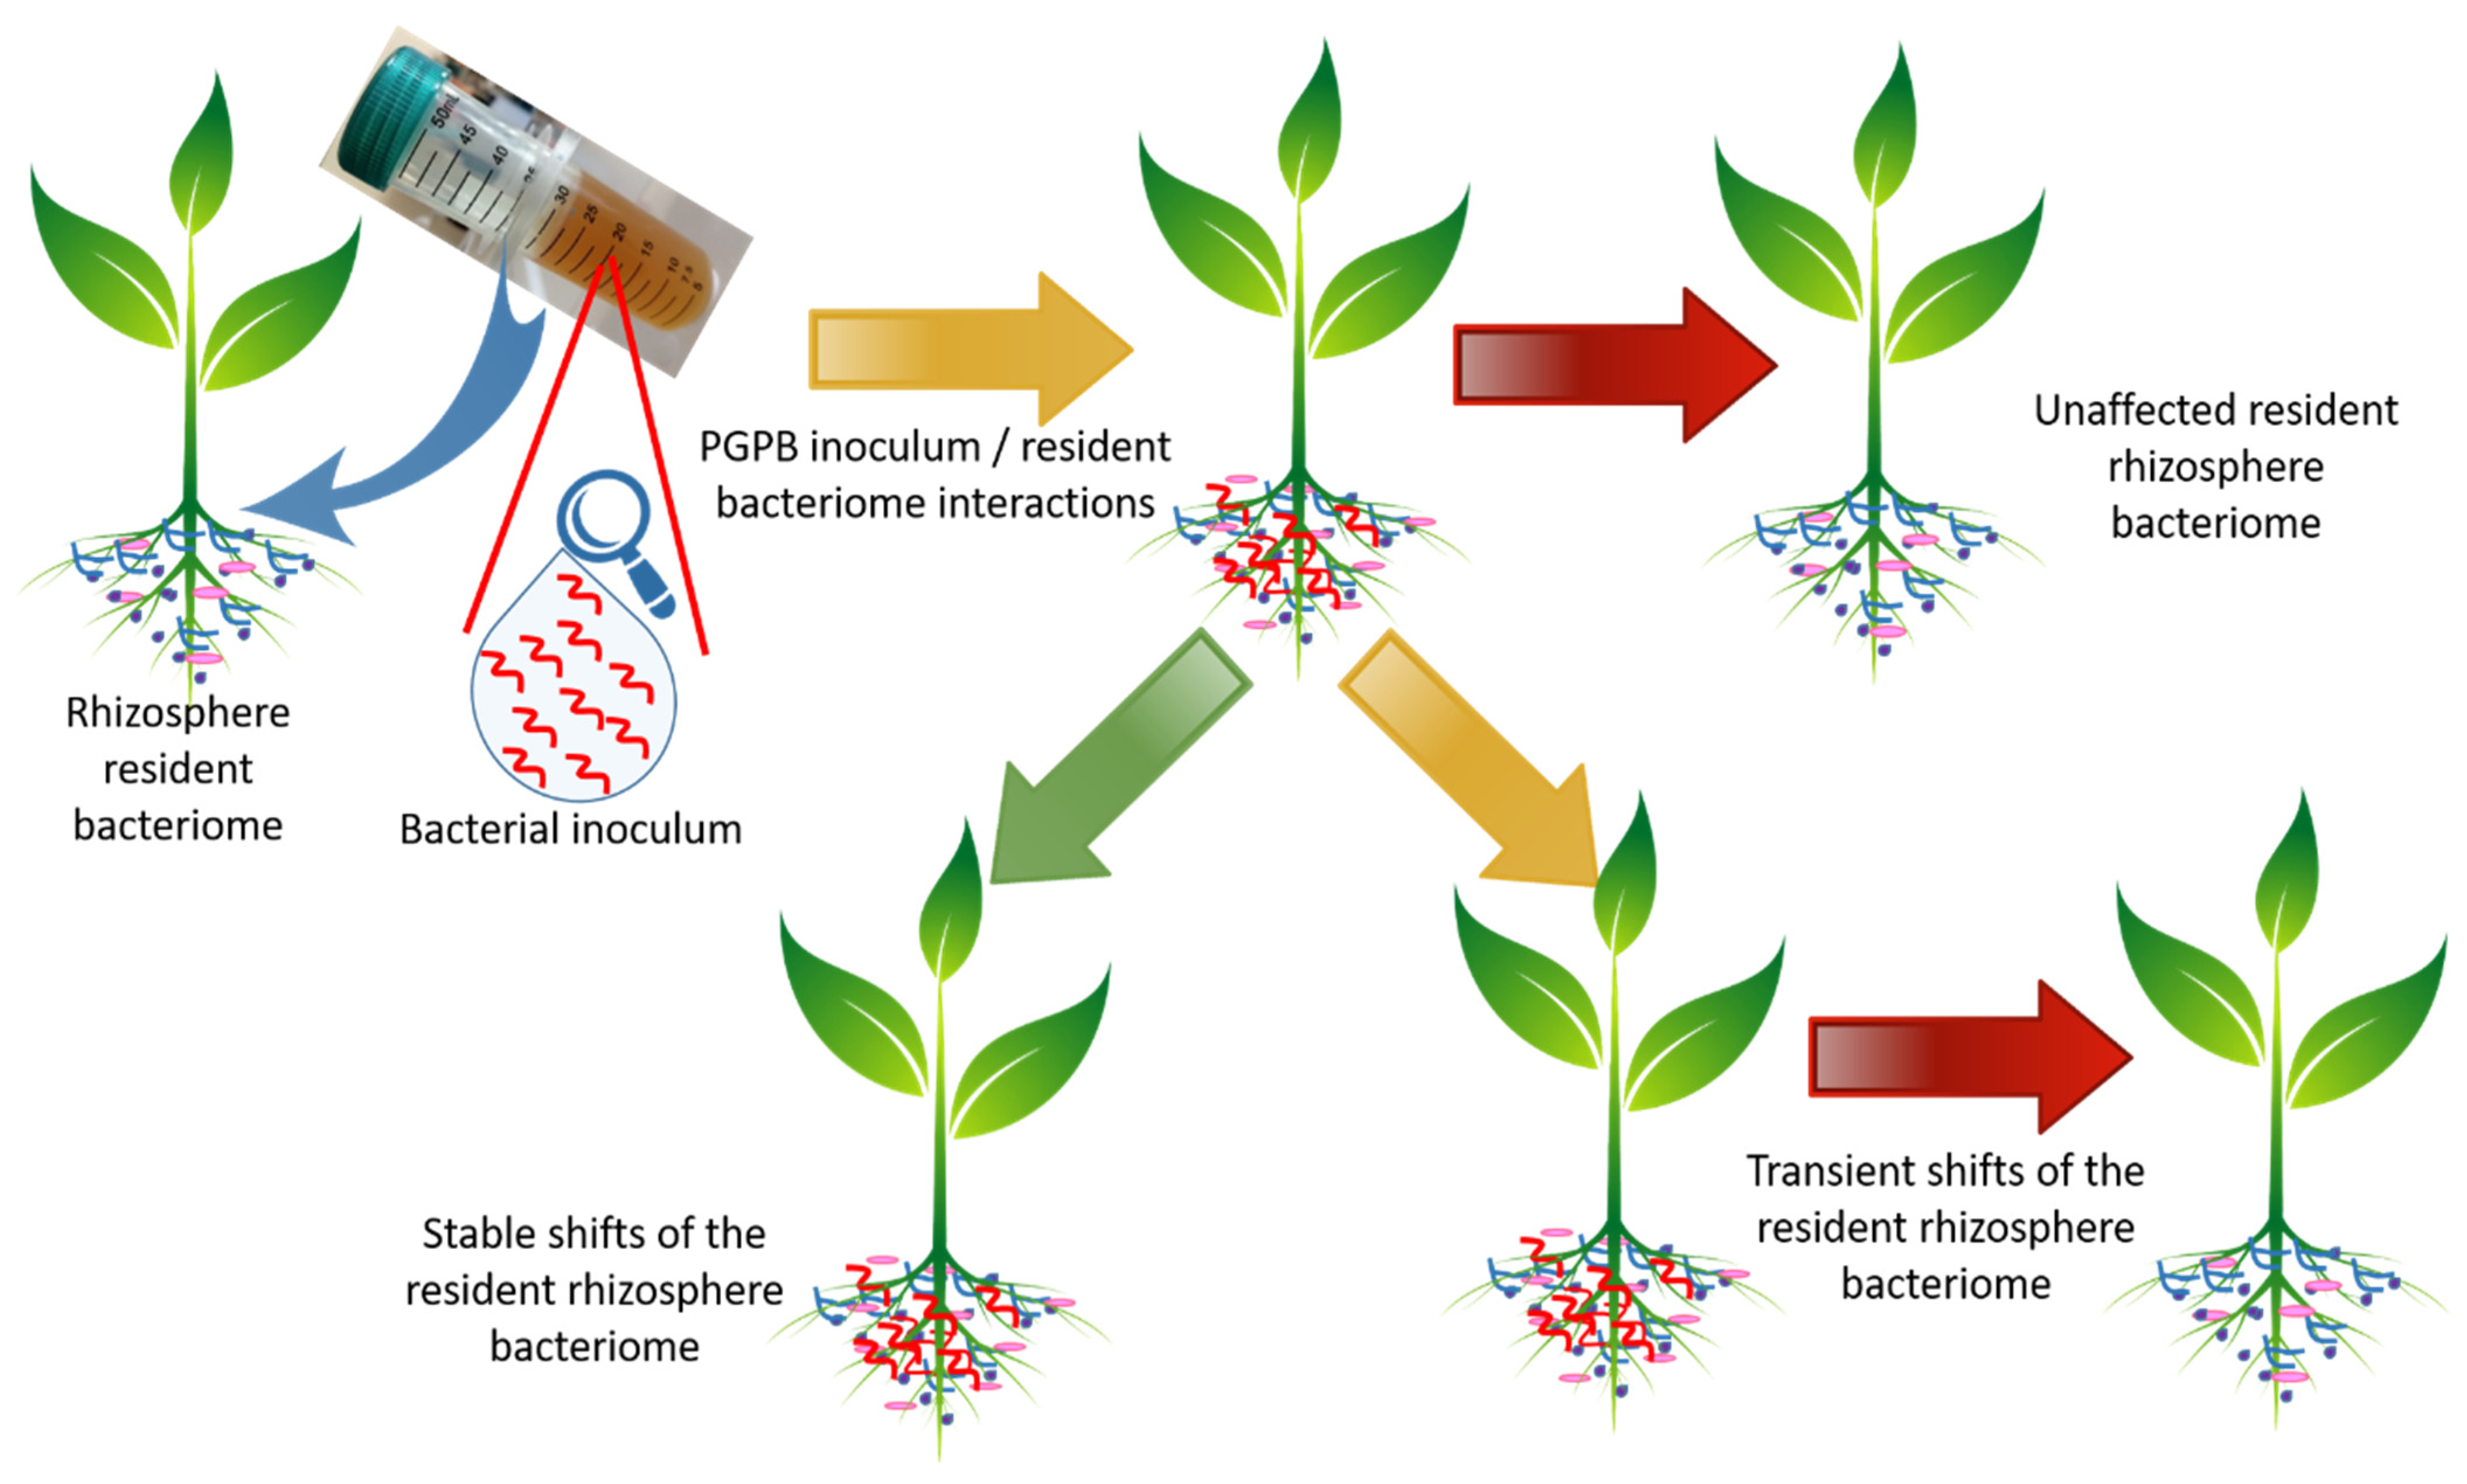 Microorganisms Free Full-Text | of Plant-Beneficial Bacterial Inocula on the Resident Bacteriome: Current Knowledge Future Perspectives